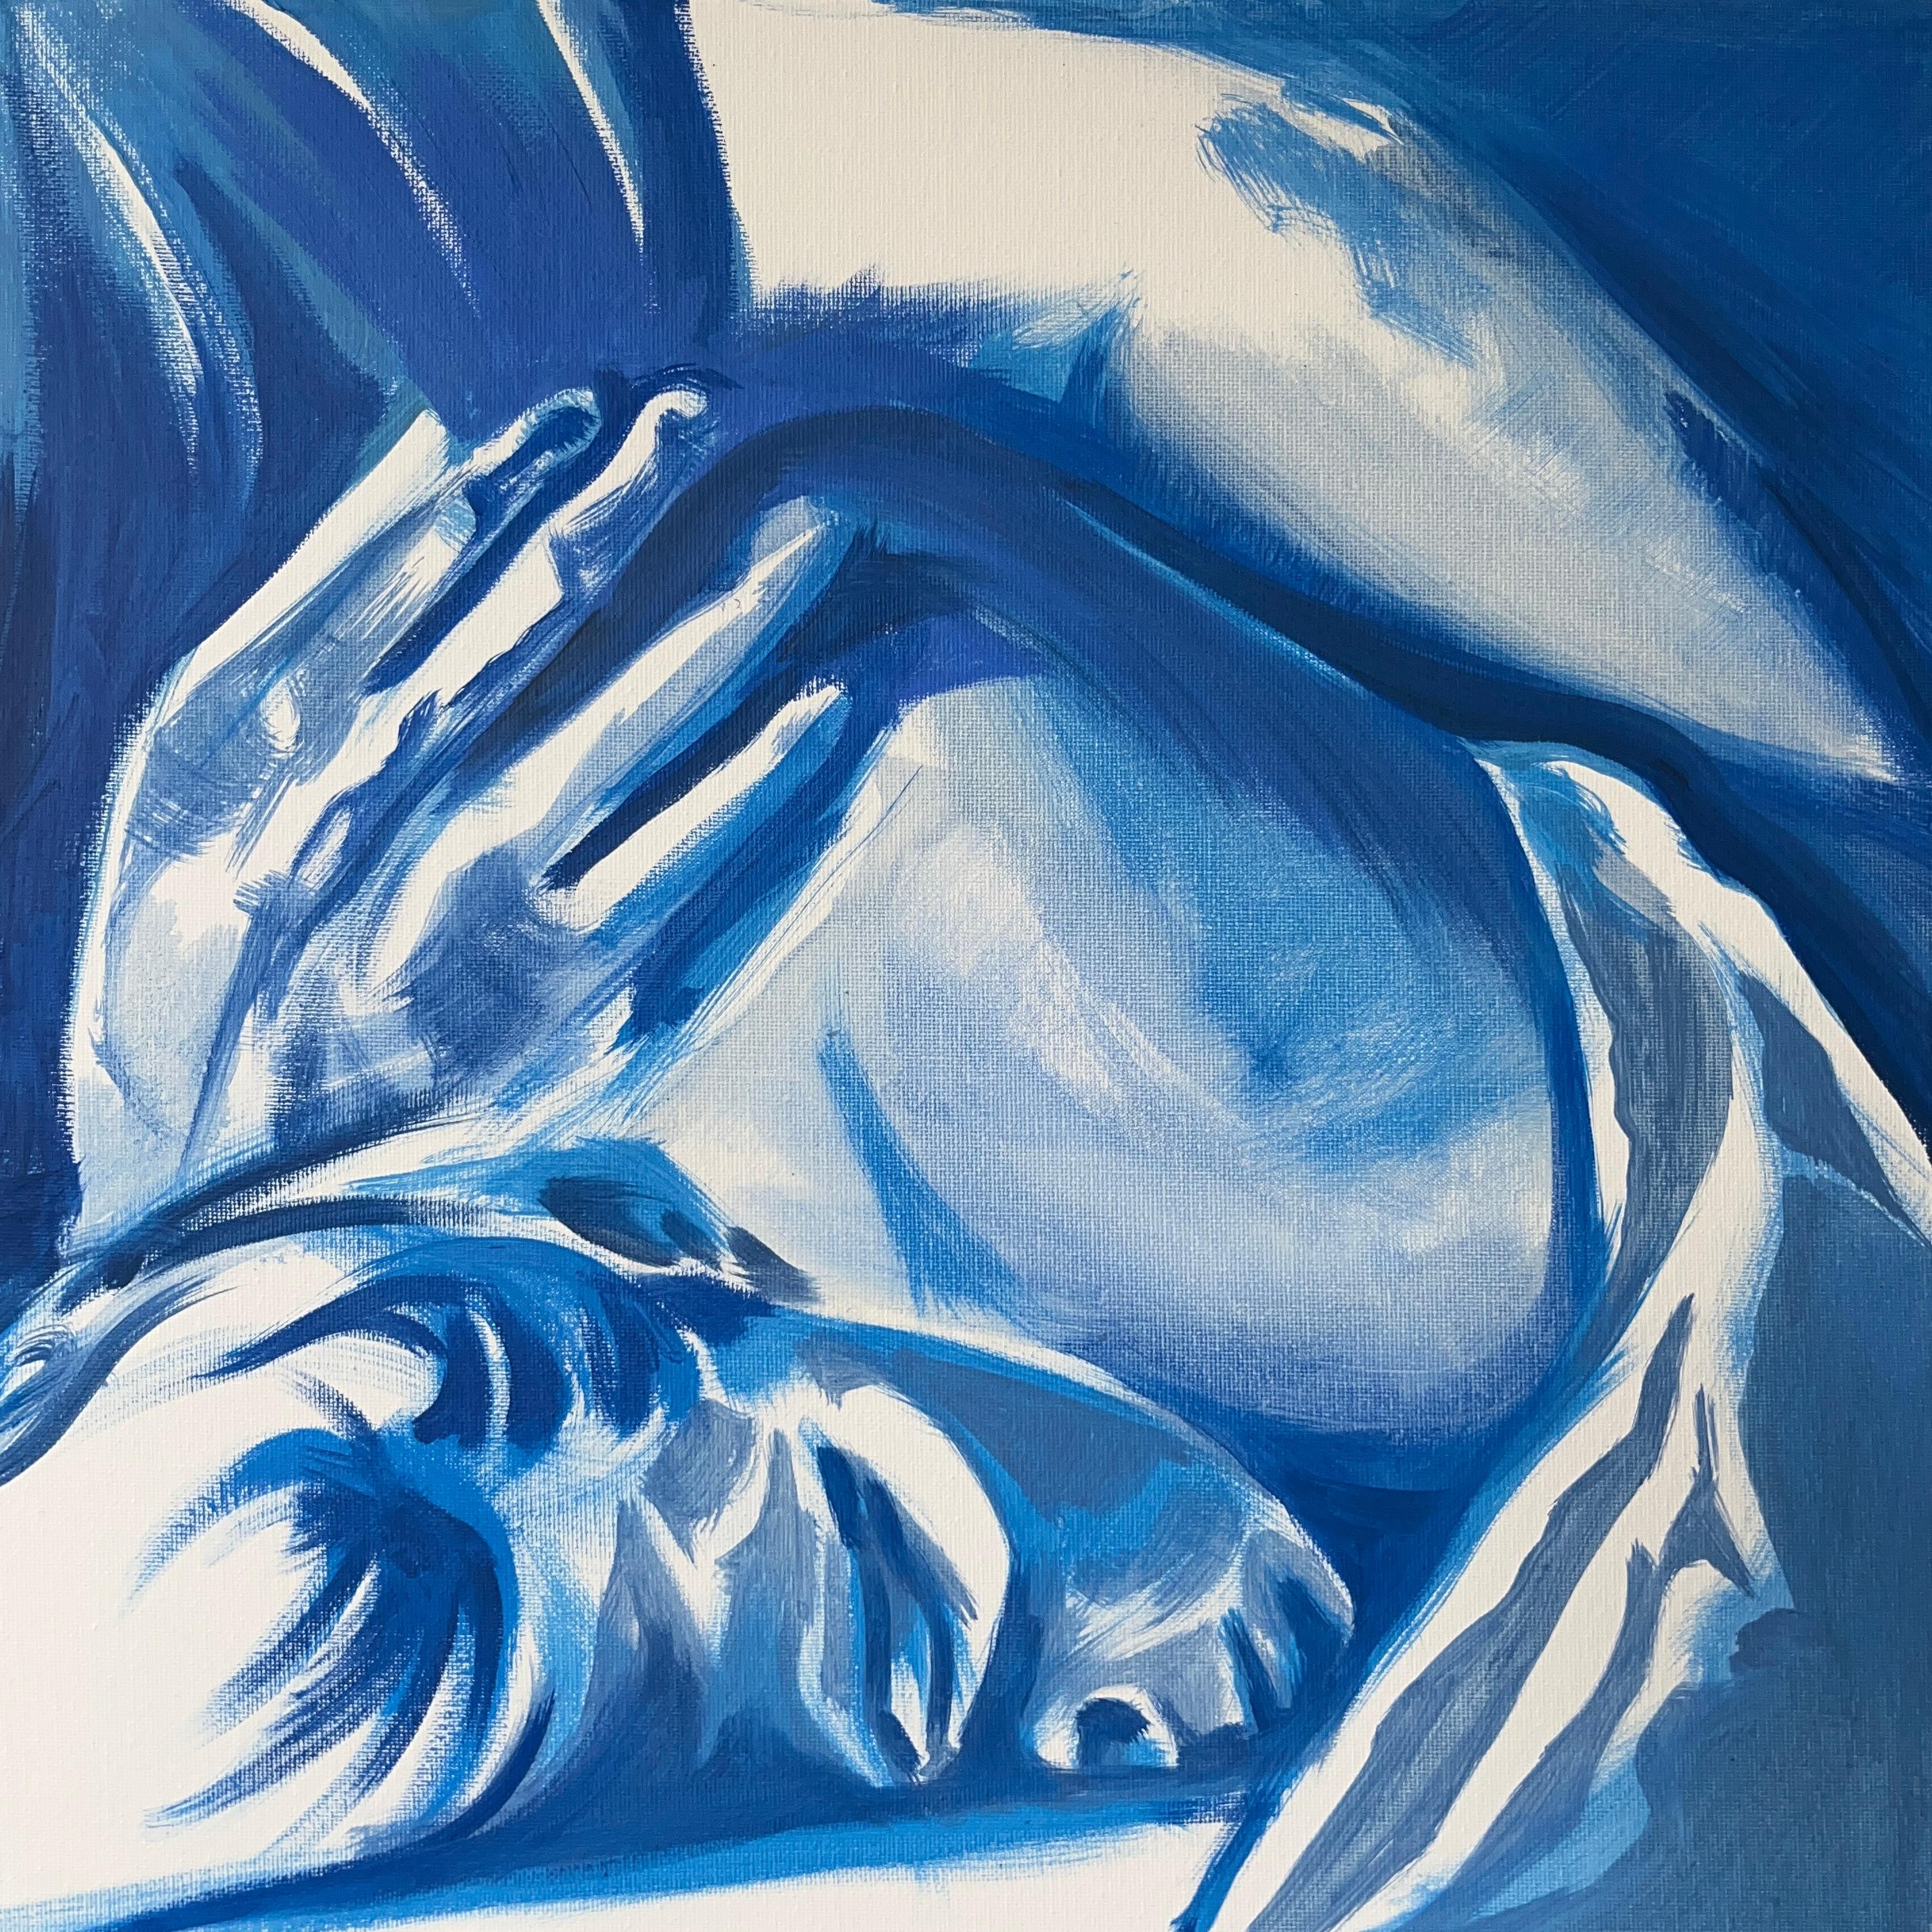 BLUE LOVE by Anna Jung  - Painting by Unknown